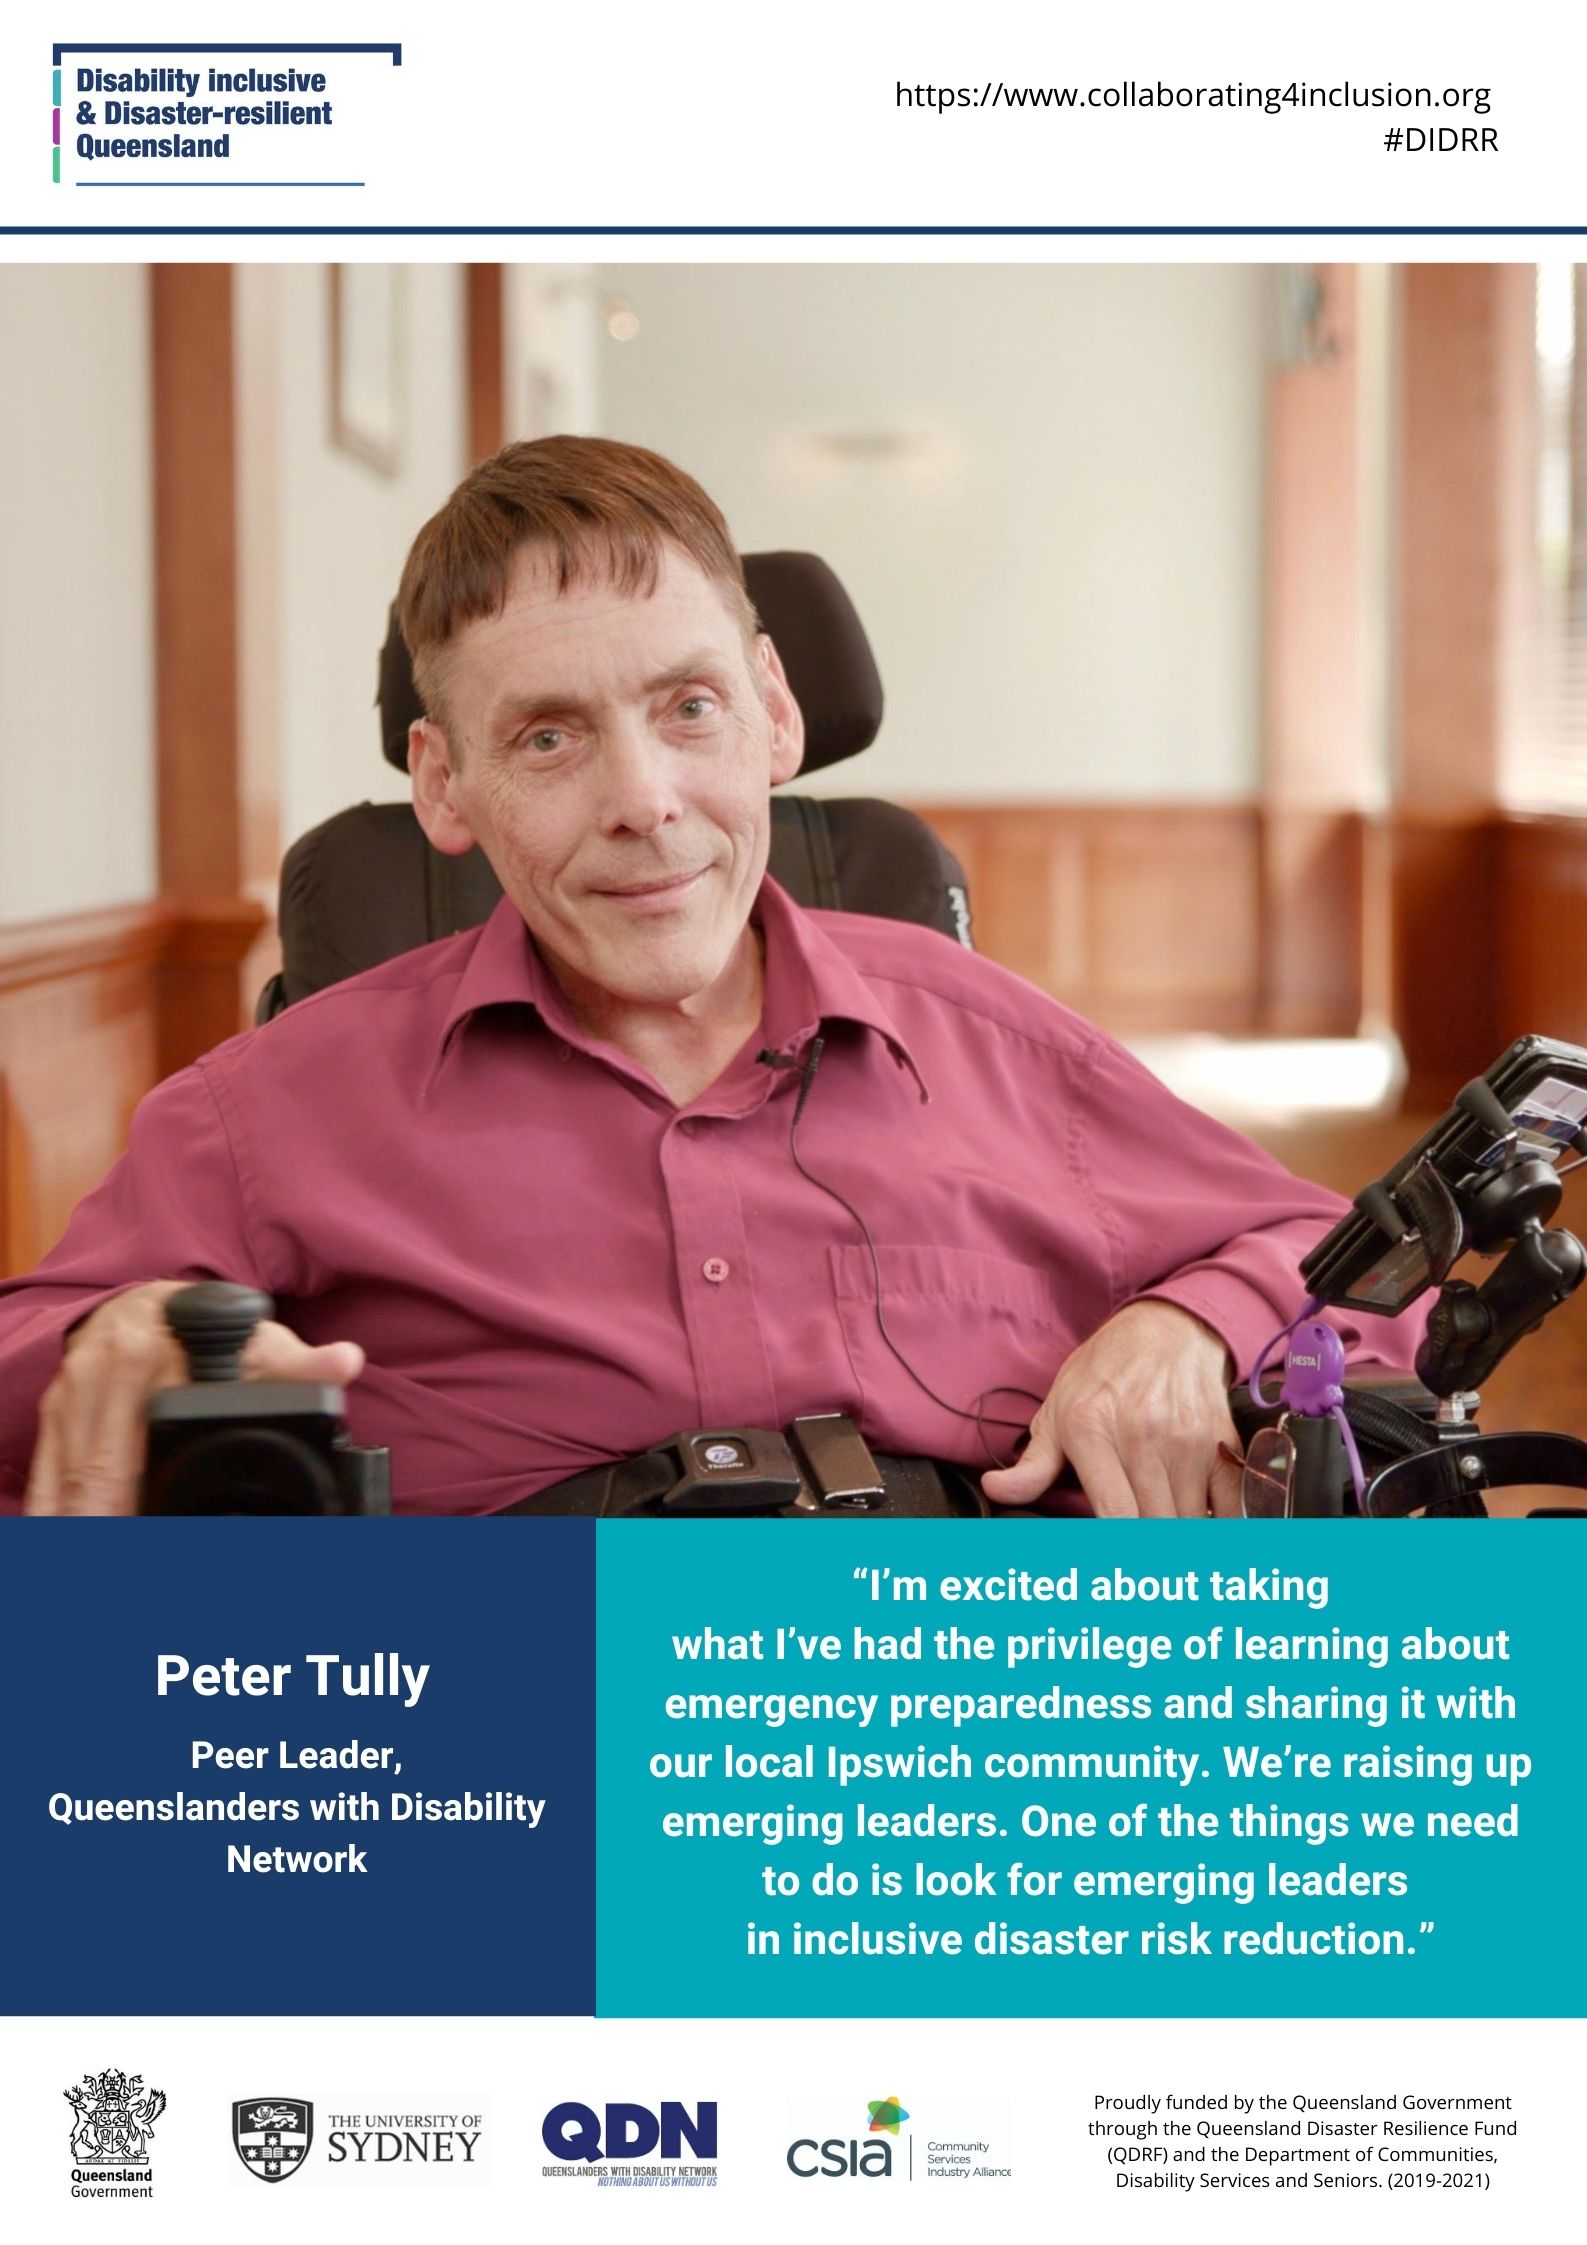 Peter Tully, 9 May 2020